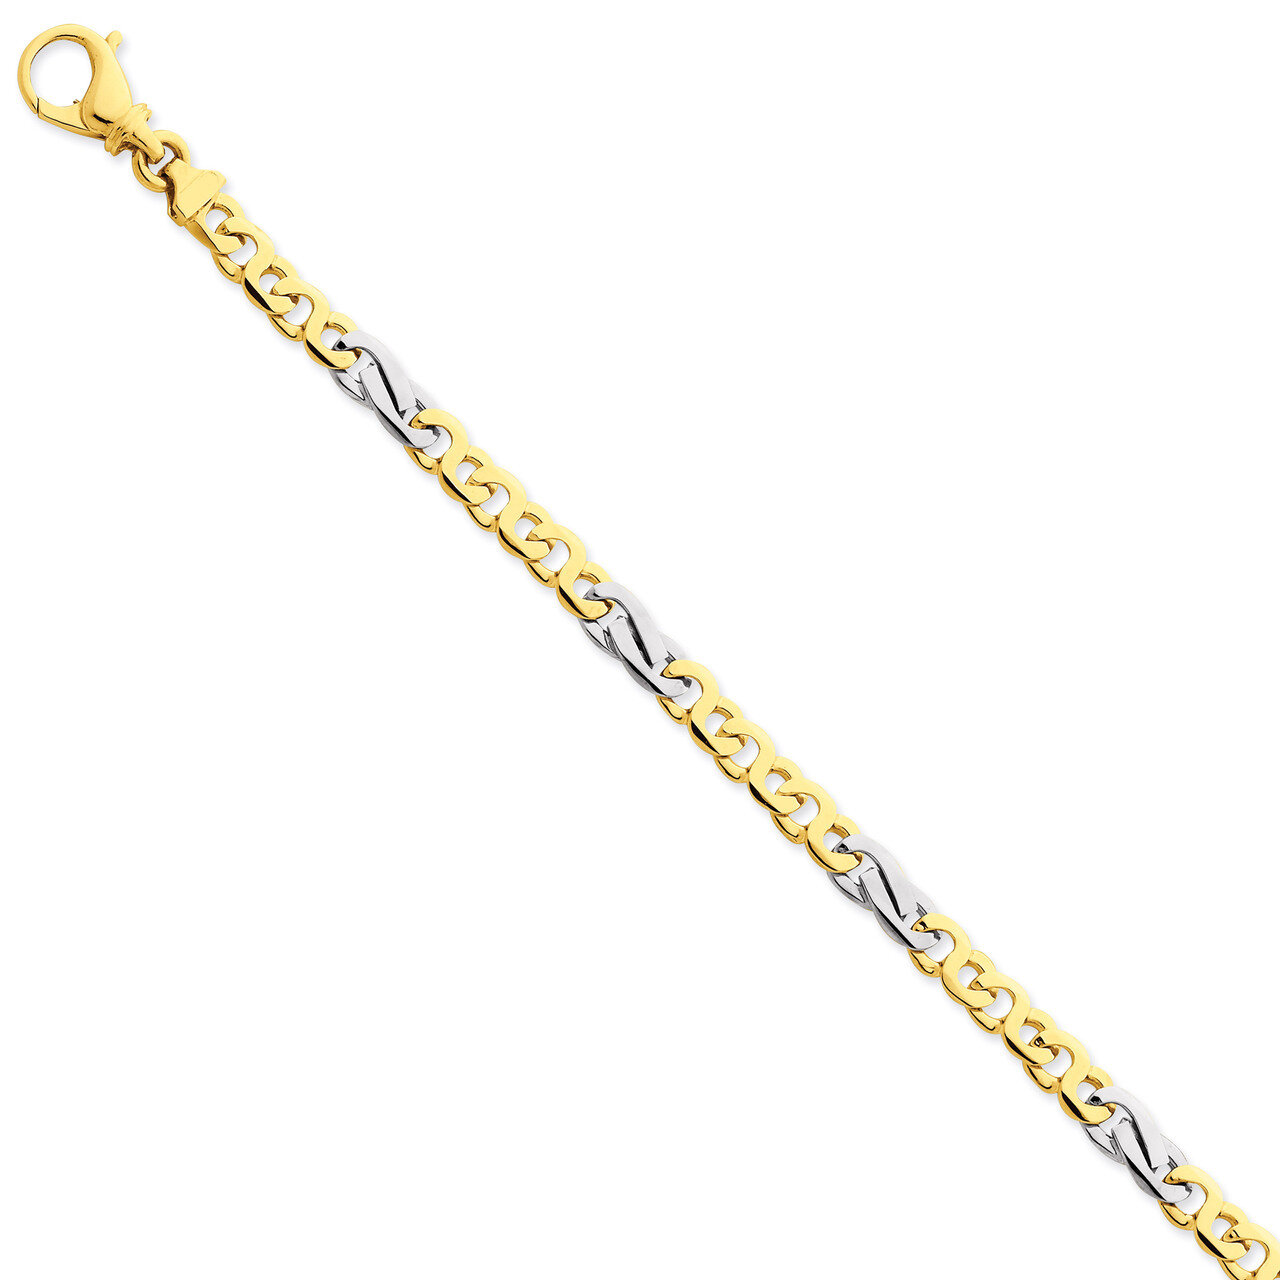 6.2mm Polished Fancy Link Chain 20 Inch 14k Two-Tone Gold LK523-20